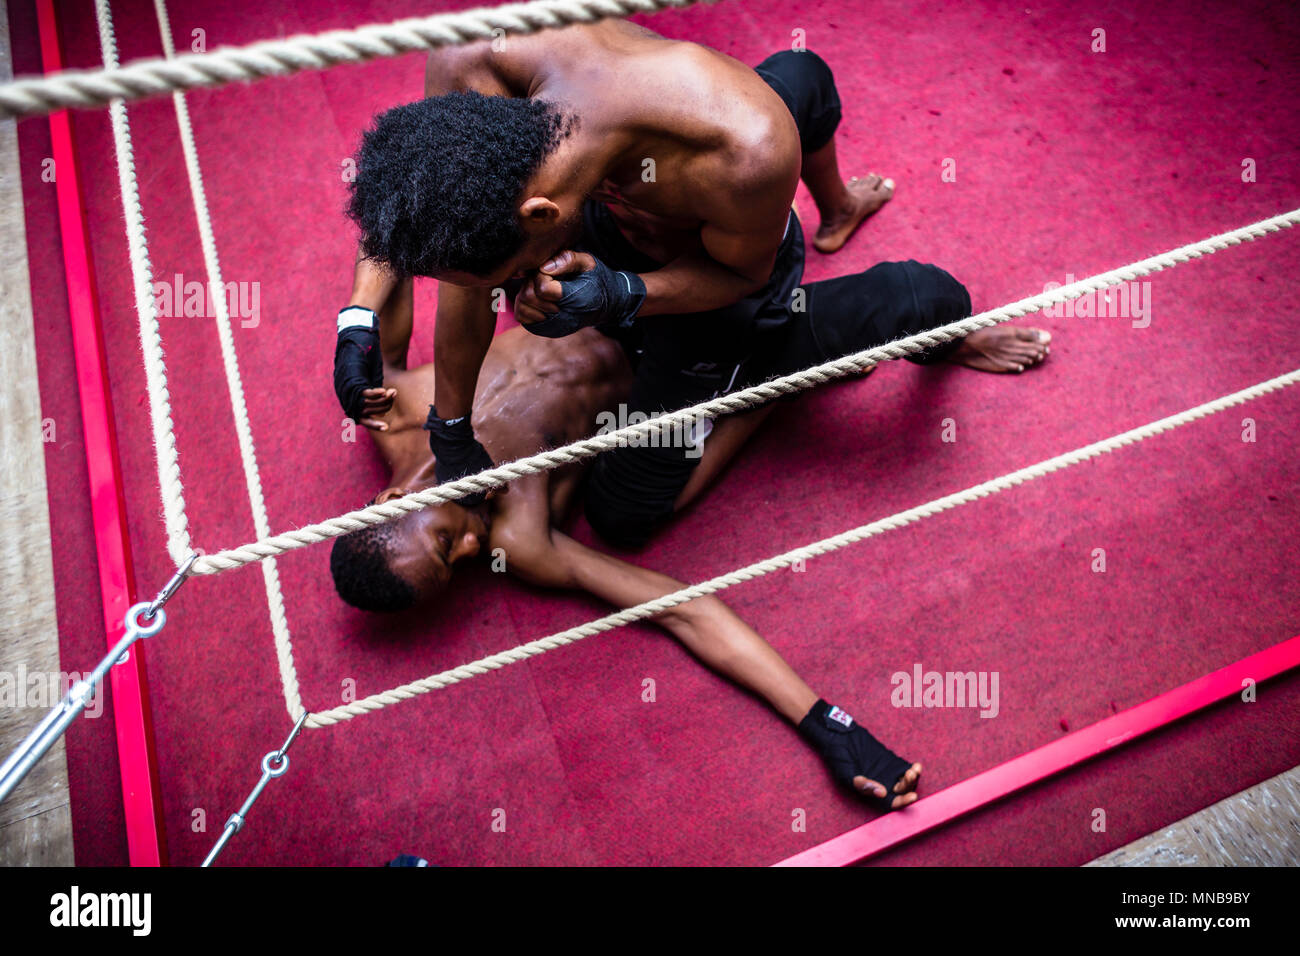 High angle view of African American fighter punching his opponent Stock Photo